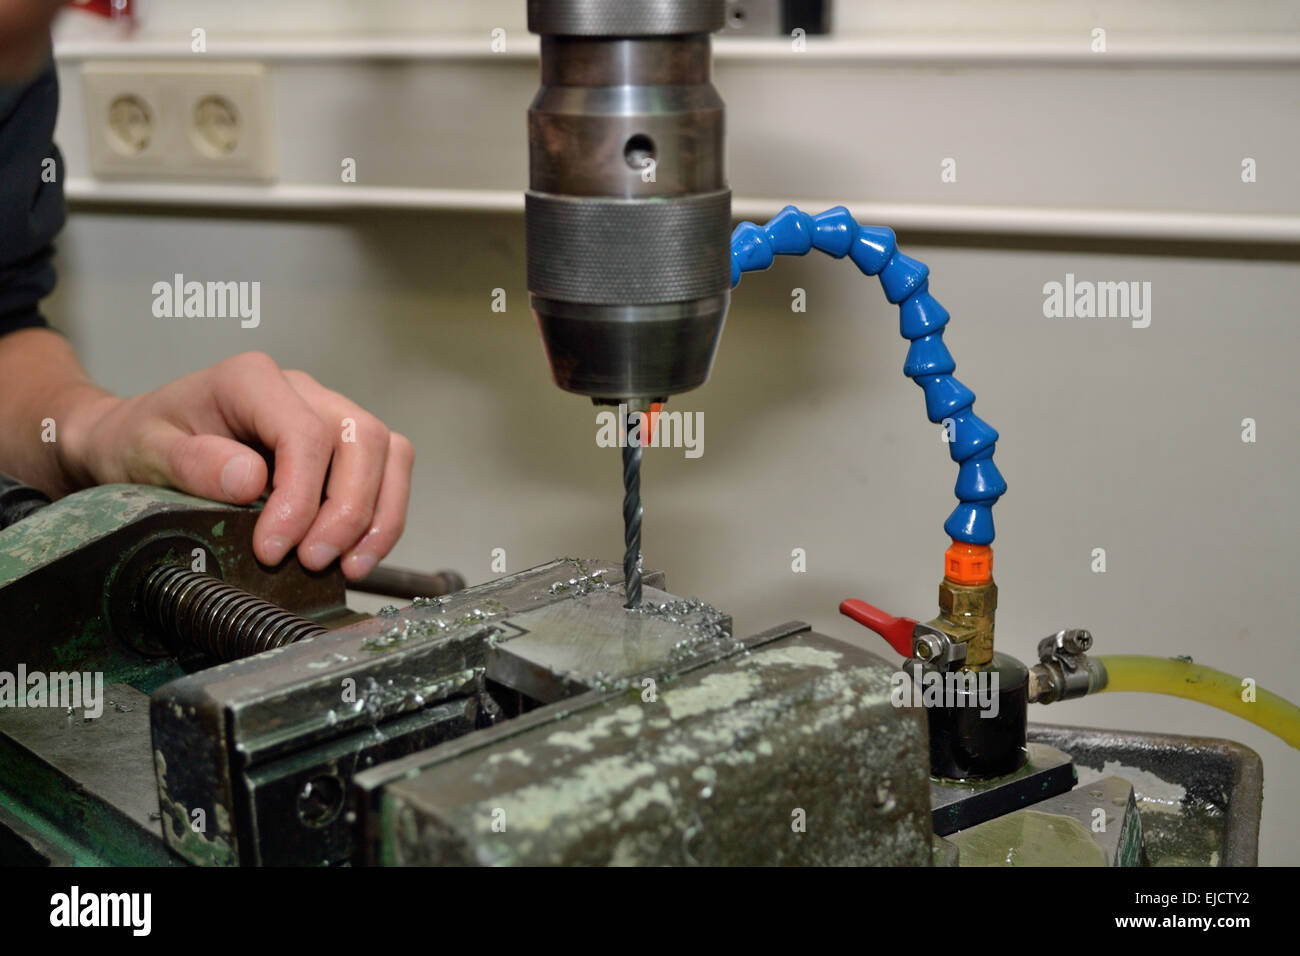 Metal working with electric drill Stock Photo